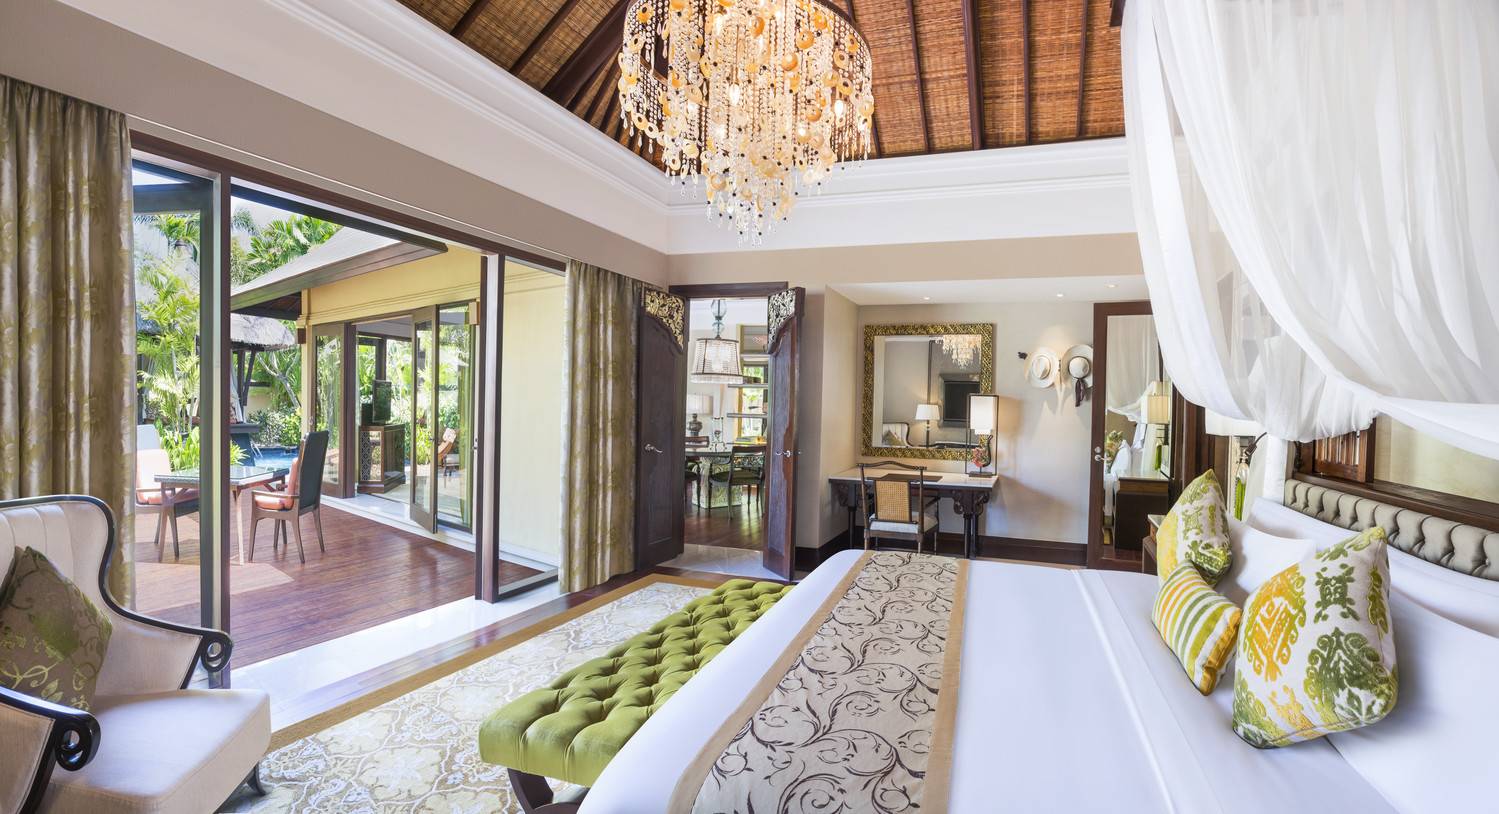 Anythinglily: bali attractions: the dreamland luxury villas & spa